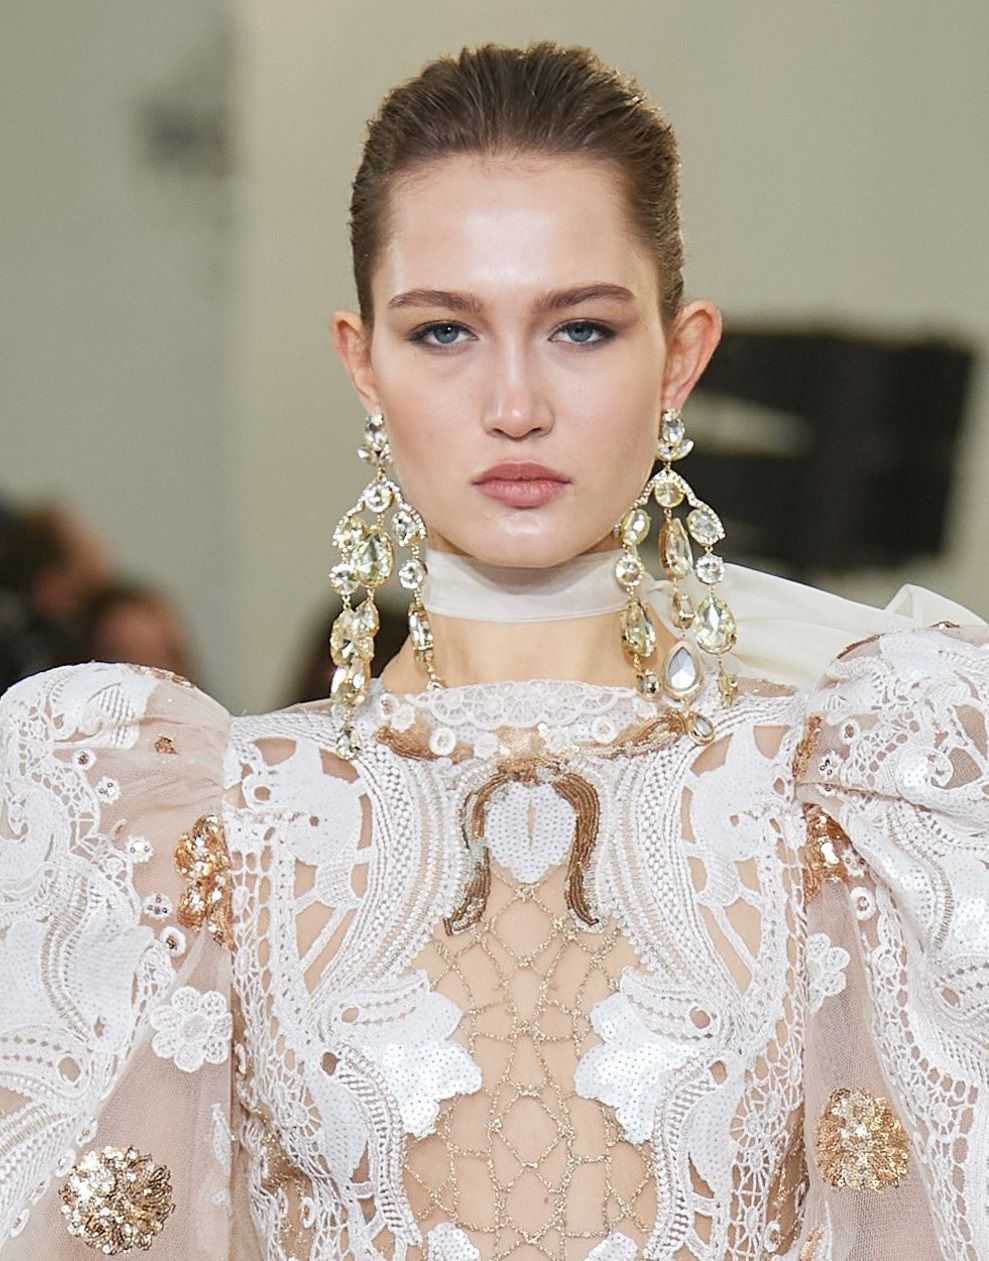 Jewelry from Paris Haute Couture Fashion Week, Which Won't Leave Anyone  Indifferent